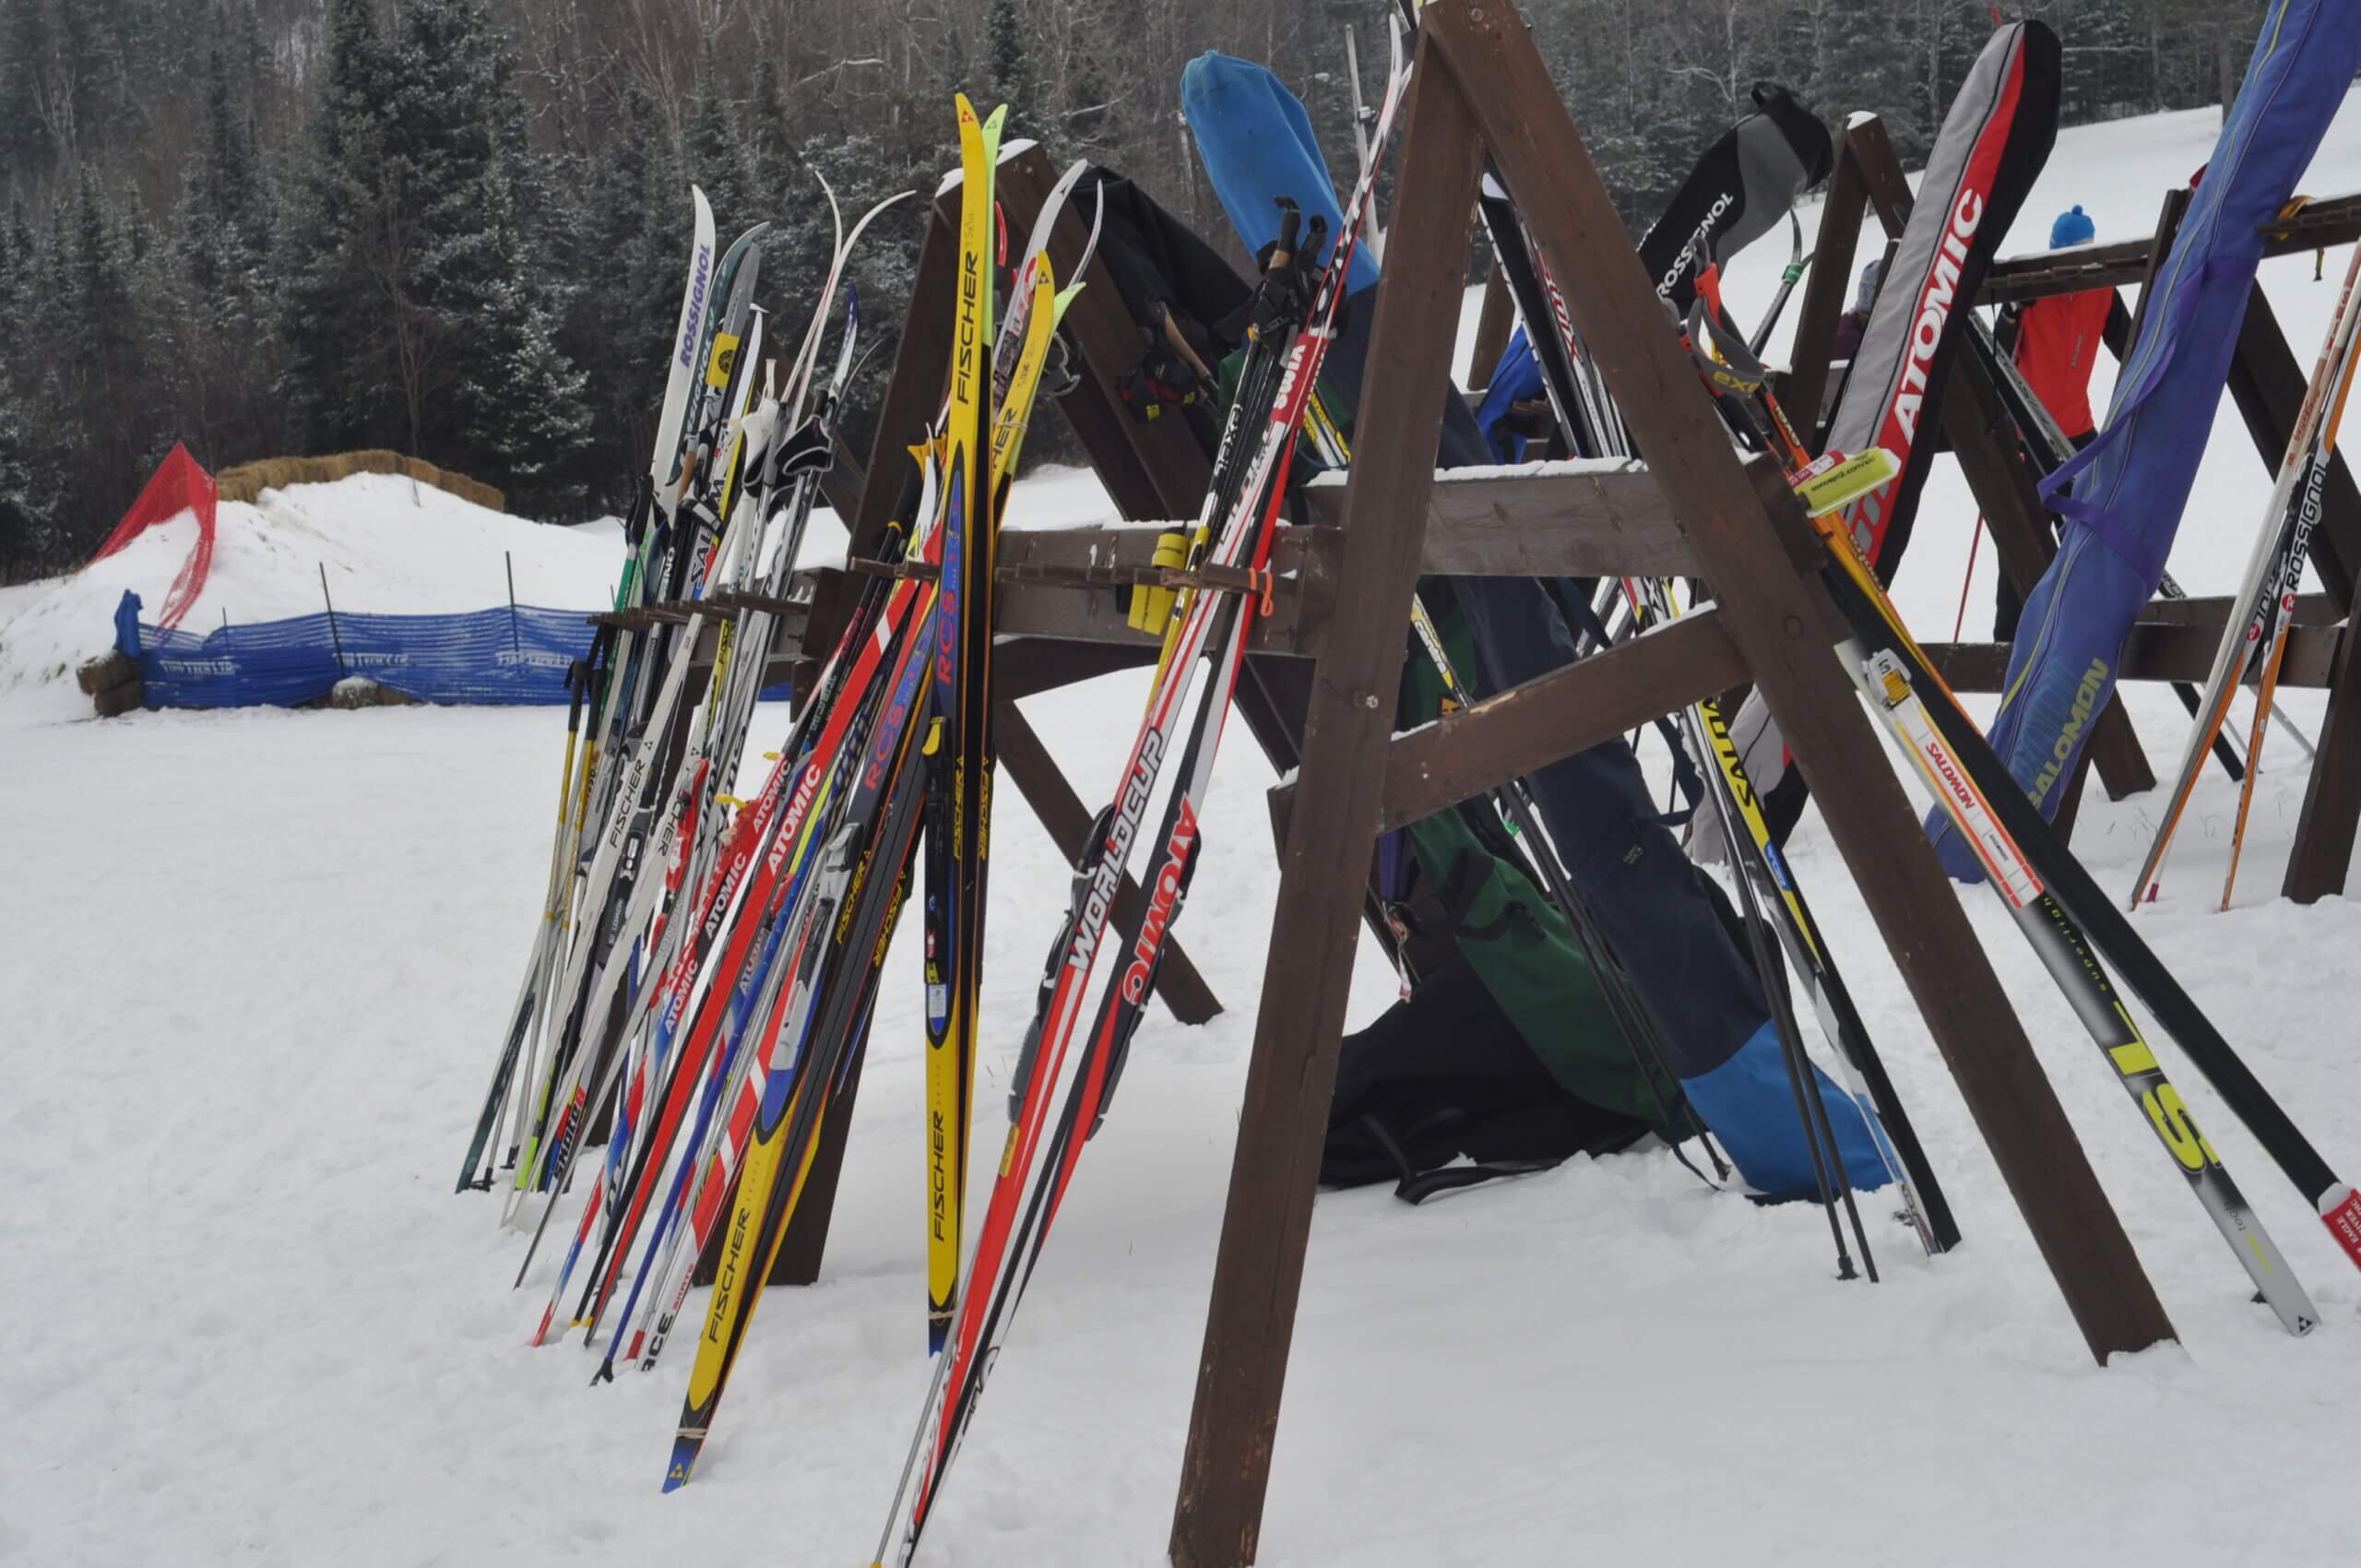 Cross country skis sit against a ski rack at Minoqua's Winter Park, whose purchase was made possible by Wisconsin's Knowles-Nelson Stewardship Program